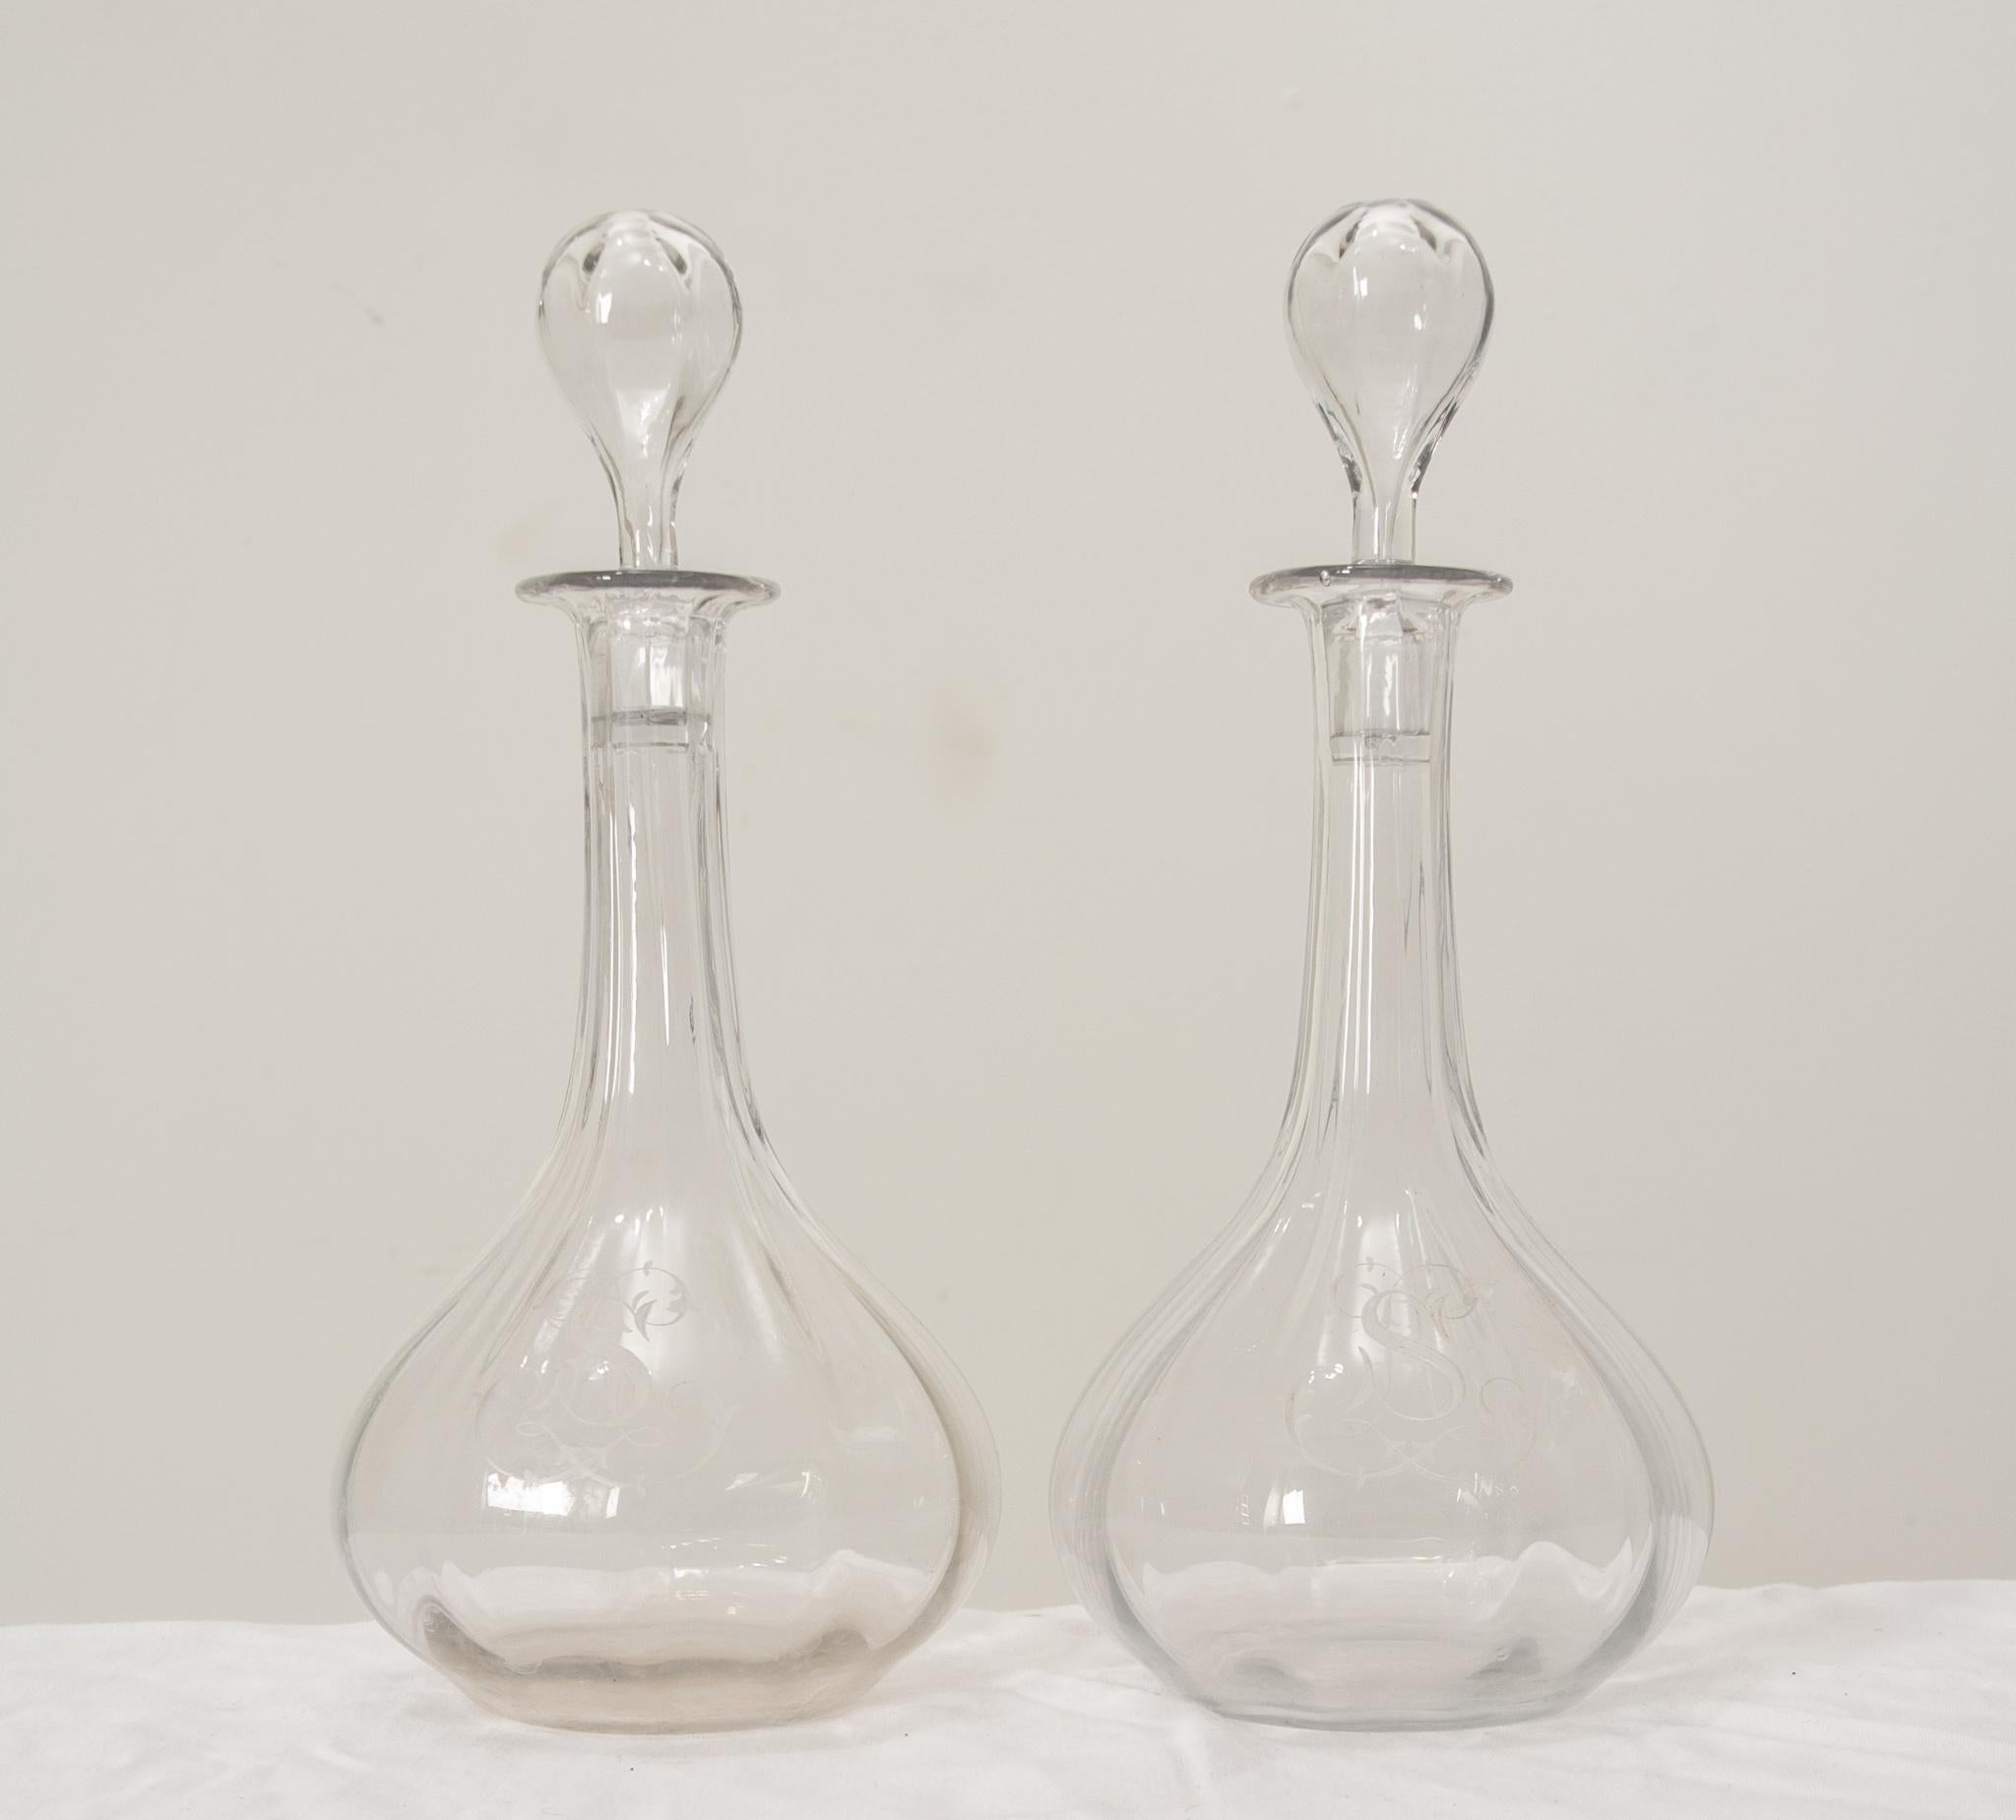 A charming set of 19th century hand blown glass decanters from France featuring clear rippled crystal glass in  fluted designs with rounded bases and elegant matching stoppers. The letter “S” is finely etched on each decanter in the center with a